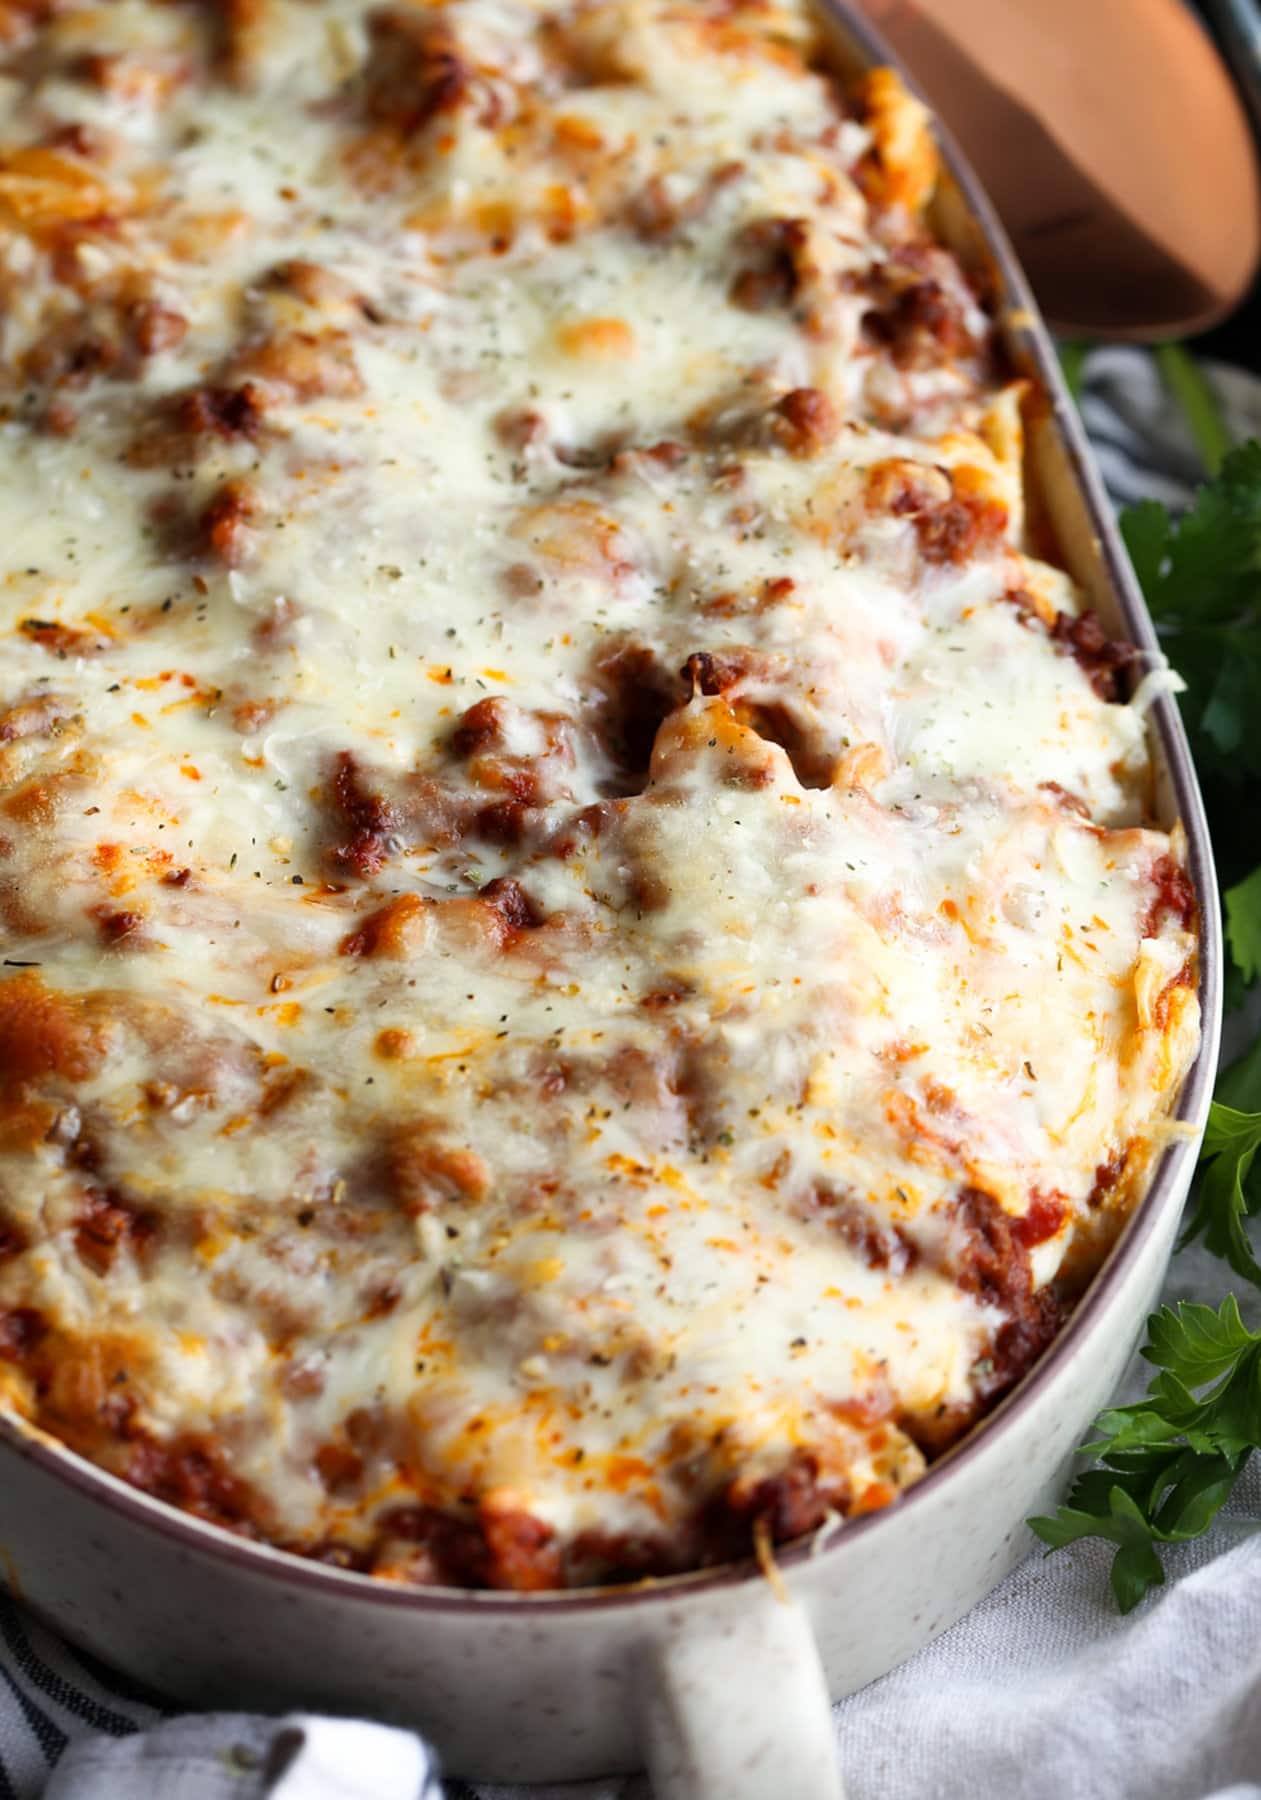 Baked unstuffed shells with meat and red sauce covered in mozzarella cheese baked in a casserole dish